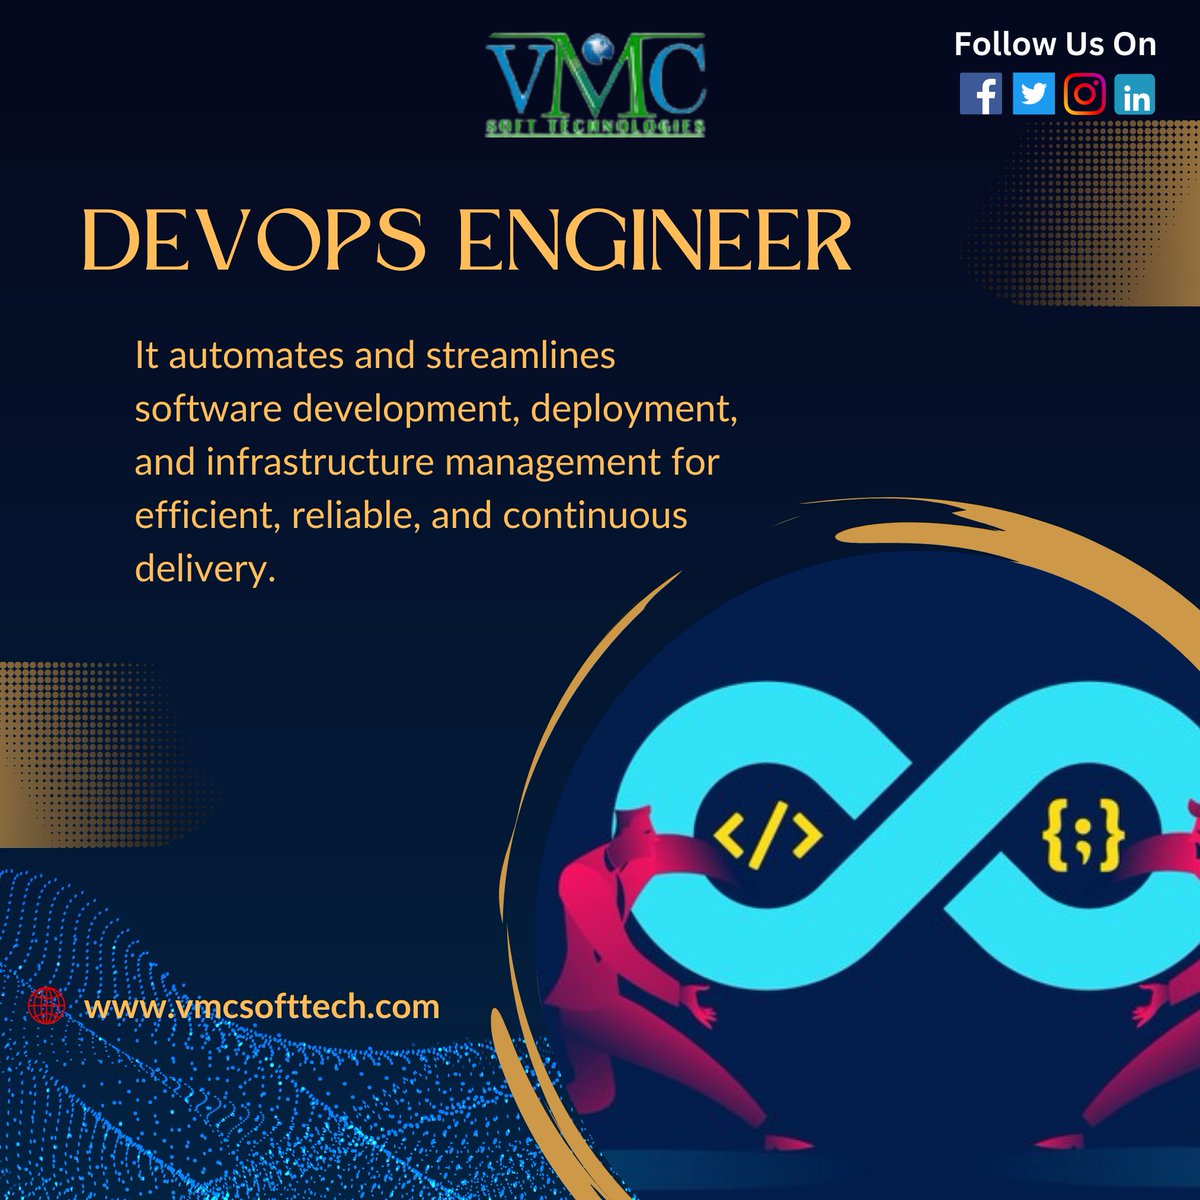 Crafting efficient solutions with code and automation, we bridge the gap between development and operations. FOR MORE INFORMATION: WEBSITE : vmcsofttech.com #DevOps #DevOpsEngineer #Automation #CloudComputing #CI_CD #InfrastructureAsCode #TechLife